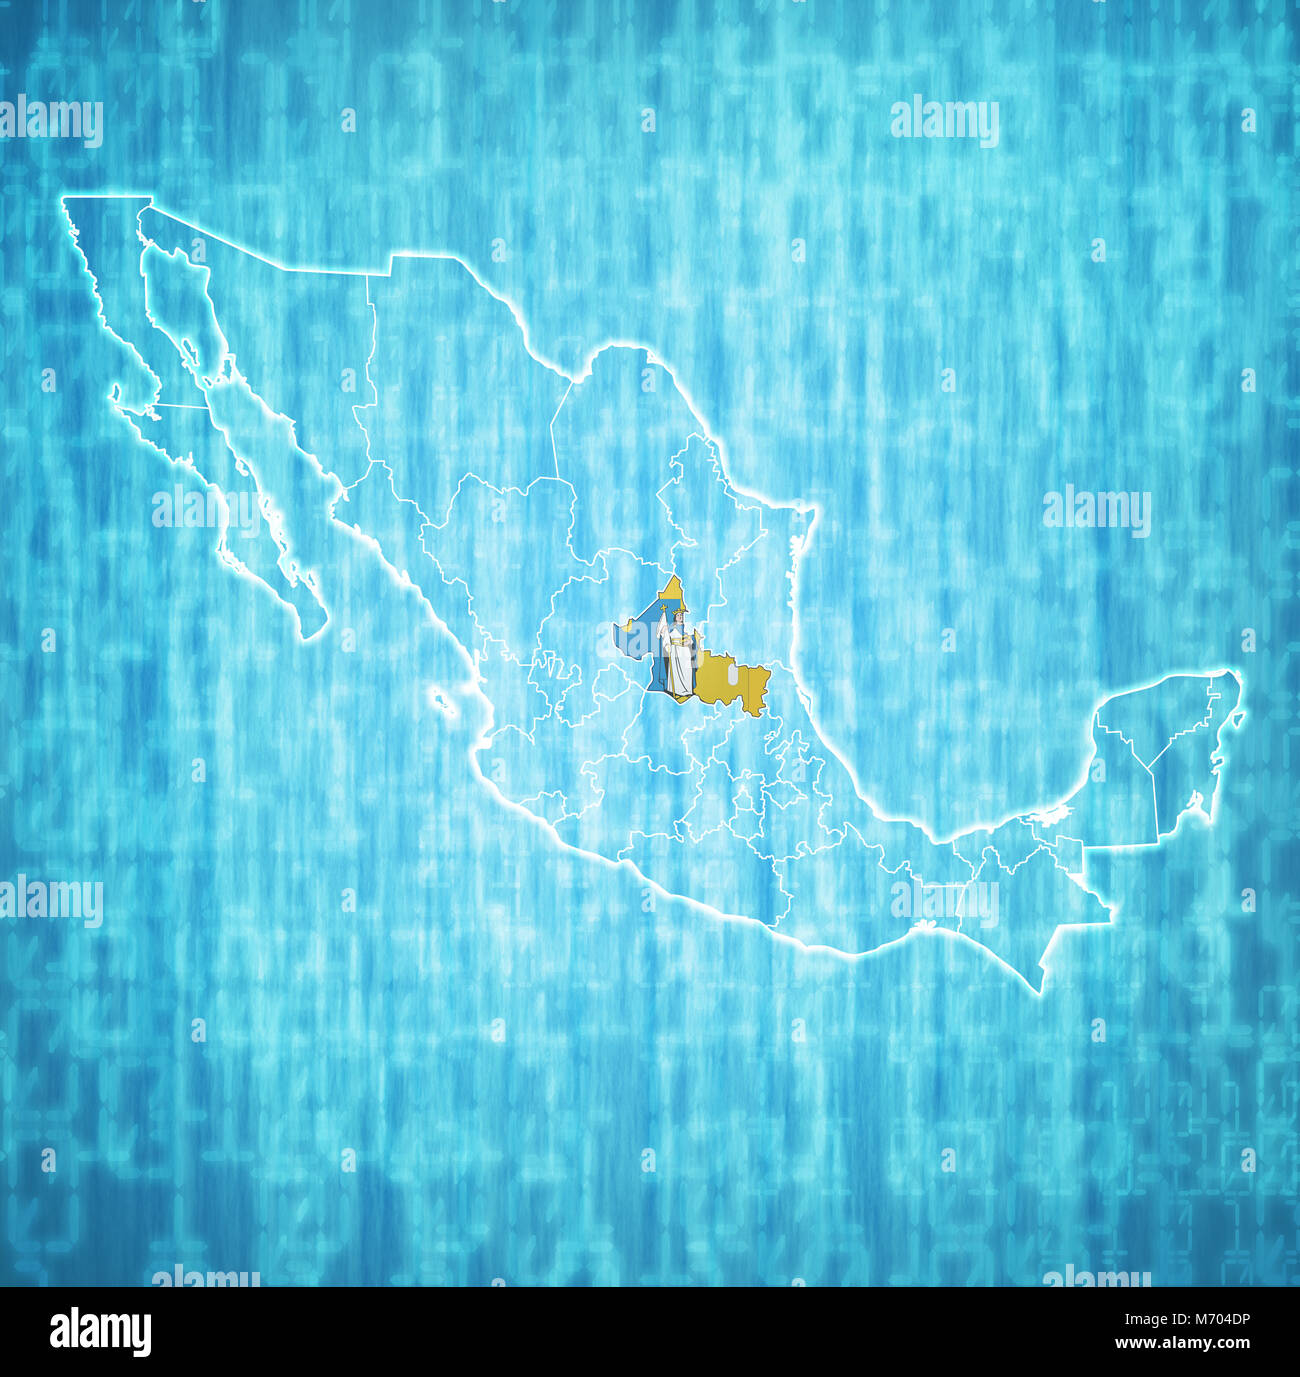 emblem of San Luis Potosi state on map with administrative divisions and borders of Mexico Stock Photo